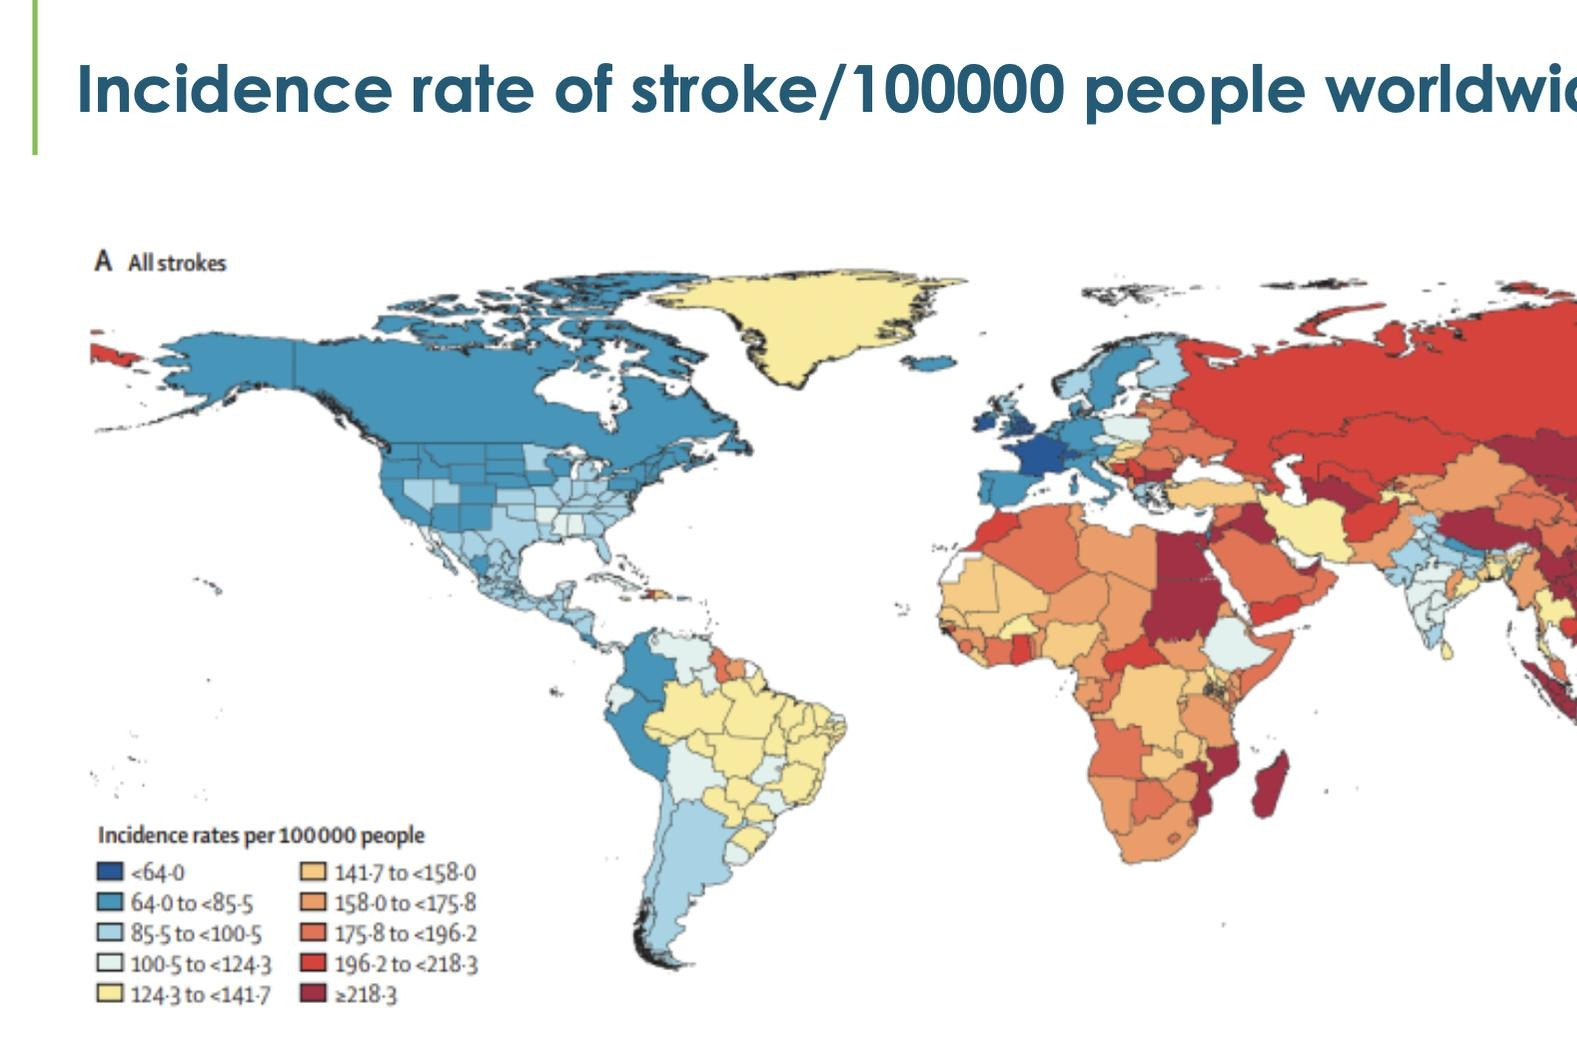 Vietnam among countries with a high incidence rate of stroke